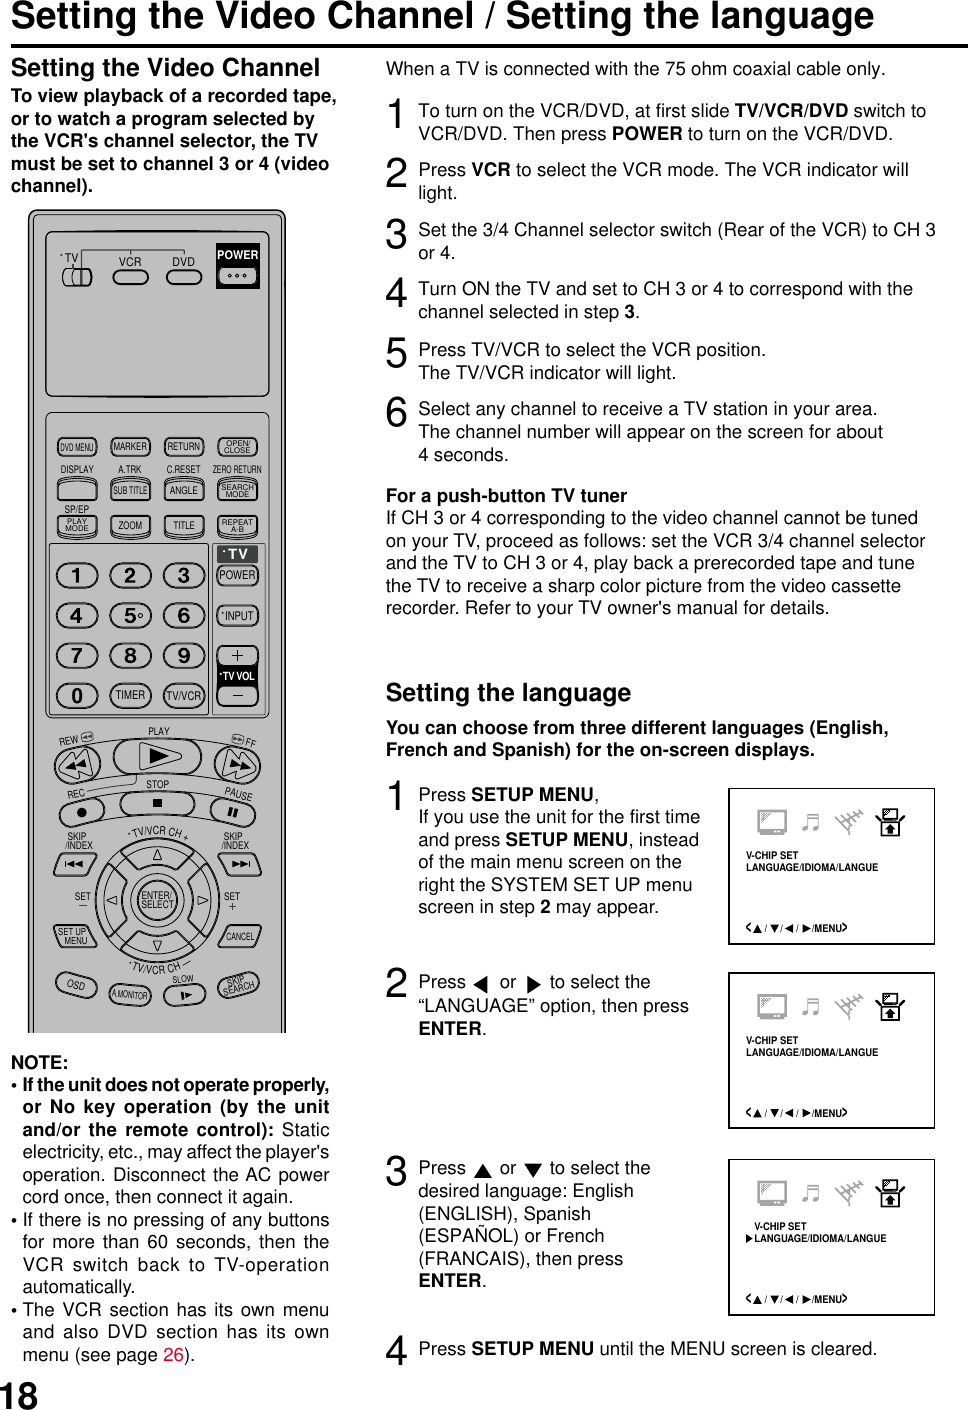 18Setting the Video Channel / Setting the languageTo view playback of a recorded tape,or to watch a program selected bythe VCR&apos;s channel selector, the TVmust be set to channel 3 or 4 (videochannel).If the unit does not operate properly,or No key operation (by the unitand/or the remote control): Staticelectricity, etc., may affect the player&apos;soperation. Disconnect the AC powercord once, then connect it again.If there is no pressing of any buttonsfor more than 60 seconds, then theVCR switch back to TV-operationautomatically.The VCR section has its own menuand also DVD section has its ownmenu (see page 26).NOTE:•••1To turn on the VCR/DVD, at first slide TV/VCR/DVD switch toVCR/DVD. Then press POWER to turn on the VCR/DVD.2Press VCR to select the VCR mode. The VCR indicator willlight.You can choose from three different languages (English,French and Spanish) for the on-screen displays.When a TV is connected with the 75 ohm coaxial cable only.3Set the 3/4 Channel selector switch (Rear of the VCR) to CH 3or 4.4Turn ON the TV and set to CH 3 or 4 to correspond with thechannel selected in step 3.5Press TV/VCR to select the VCR position.The TV/VCR indicator will light.6Select any channel to receive a TV station in your area.The channel number will appear on the screen for about4 seconds.For a push-button TV tunerIf CH 3 or 4 corresponding to the video channel cannot be tunedon your TV, proceed as follows: set the VCR 3/4 channel selectorand the TV to CH 3 or 4, play back a prerecorded tape and tunethe TV to receive a sharp color picture from the video cassetterecorder. Refer to your TV owner&apos;s manual for details.Setting the Video ChannelSetting the language&lt;     /     /     /     /MENU&gt;V-CHIP SETLANGUAGE/IDIOMA/LANGUE&lt;     /     /     /     /MENU&gt;V-CHIP SETLANGUAGE/IDIOMA/LANGUE3Press SETUP MENU,If you use the unit for the first timeand press SETUP MENU, insteadof the main menu screen on theright the SYSTEM SET UP menuscreen in step 2 may appear.Press   or   to select thedesired language: English(ENGLISH), Spanish(ESPAÑOL) or French(FRANCAIS), then pressENTER.12Press   or   to select the“LANGUAGE” option, then pressENTER.4Press SETUP MENU until the MENU screen is cleared.TV/VCRCH+TV VCR DVDPOWERDVD MENUMARKER RETURNOPEN/CLOSEDISPLAY A.TRK C.RESETZERO RETURNSUB TITLEANGLESEARCHMODESP/EPPLAYMODEZOOM TITLEREPEATA-BTVPOWERINPUTTV VOL0TIMER TV/VCRREWPLAYFFRECSTOPPAUSE SKIP/INDEX  SKIP/INDEXTV/VCRCH—SET SETENTER/SELECTSET UP   MENUCANCELOSDA.MONITORSLOWSKIP SEARCH&lt;     /     /     /     /MENU&gt;V-CHIP SETLANGUAGE/IDIOMA/LANGUE